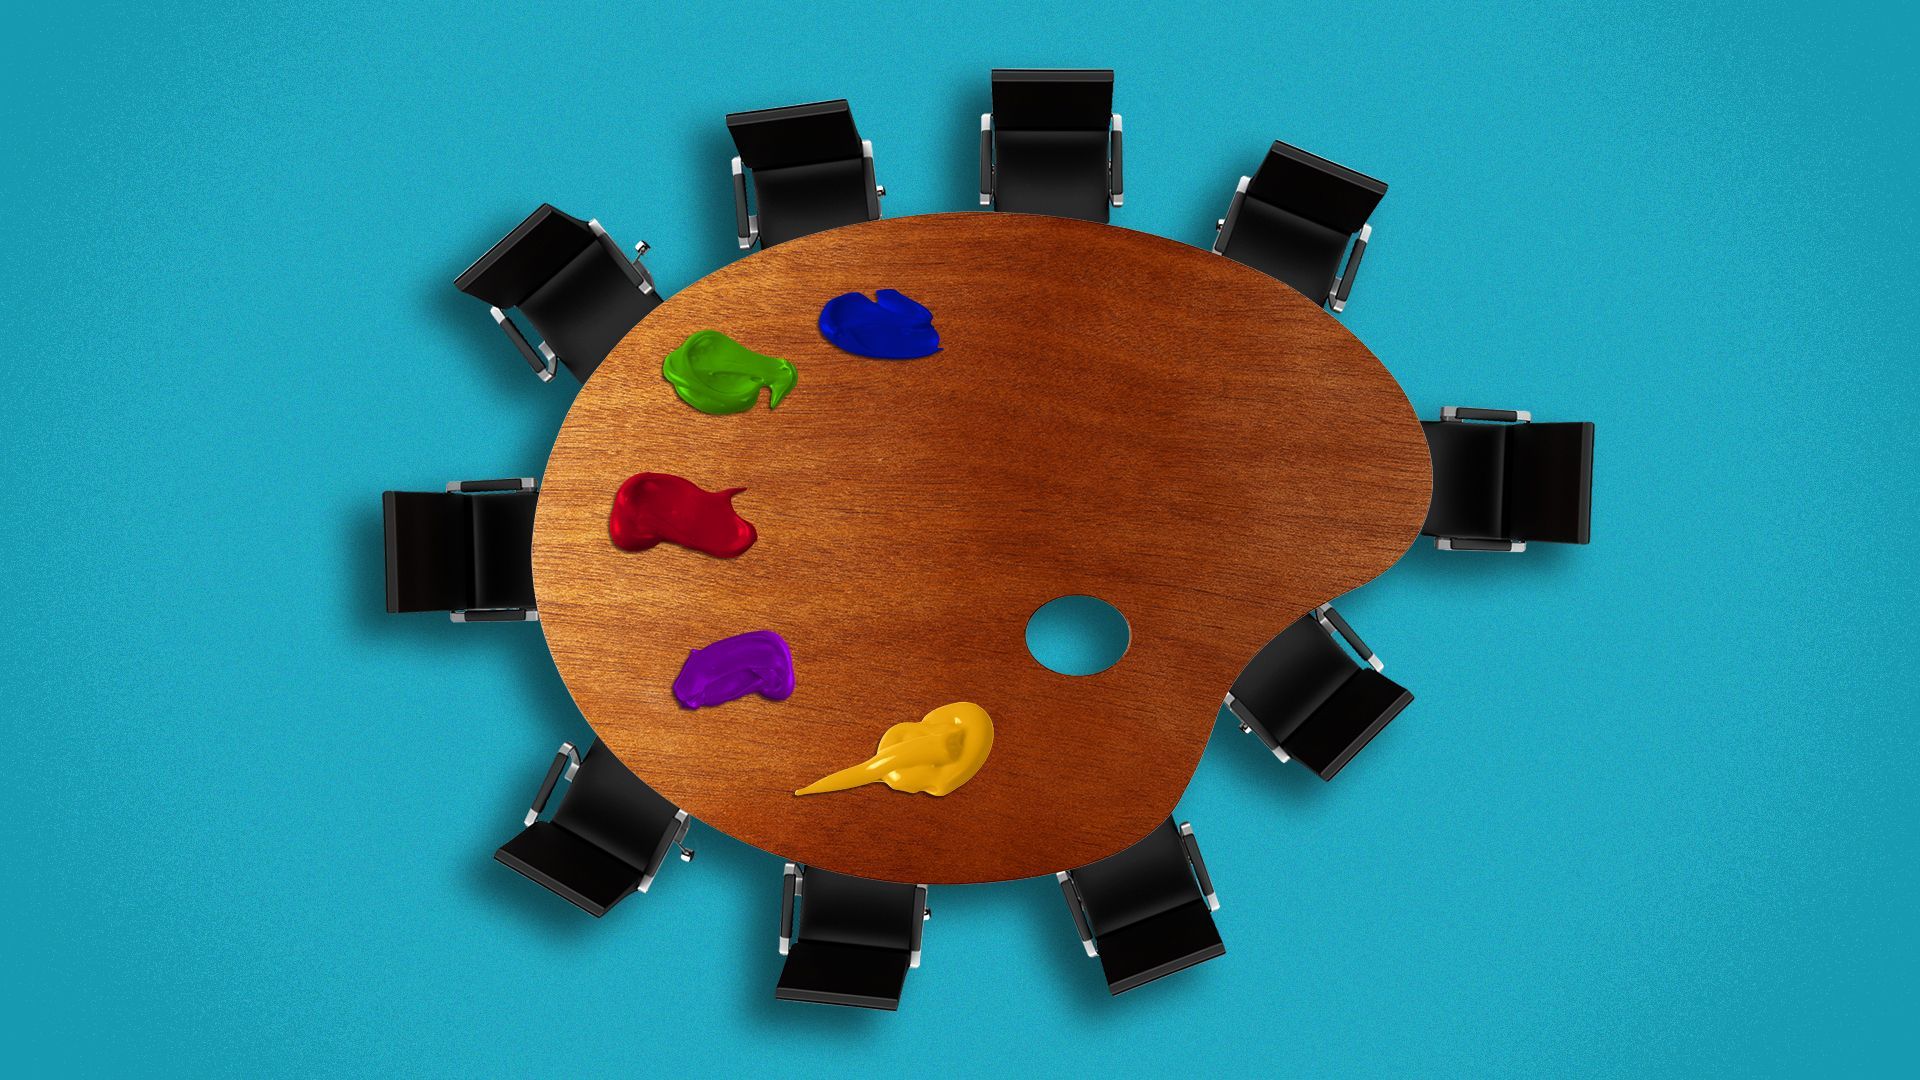 Illustration of a conference table in the shape of a paint palette, surrounded by chairs.